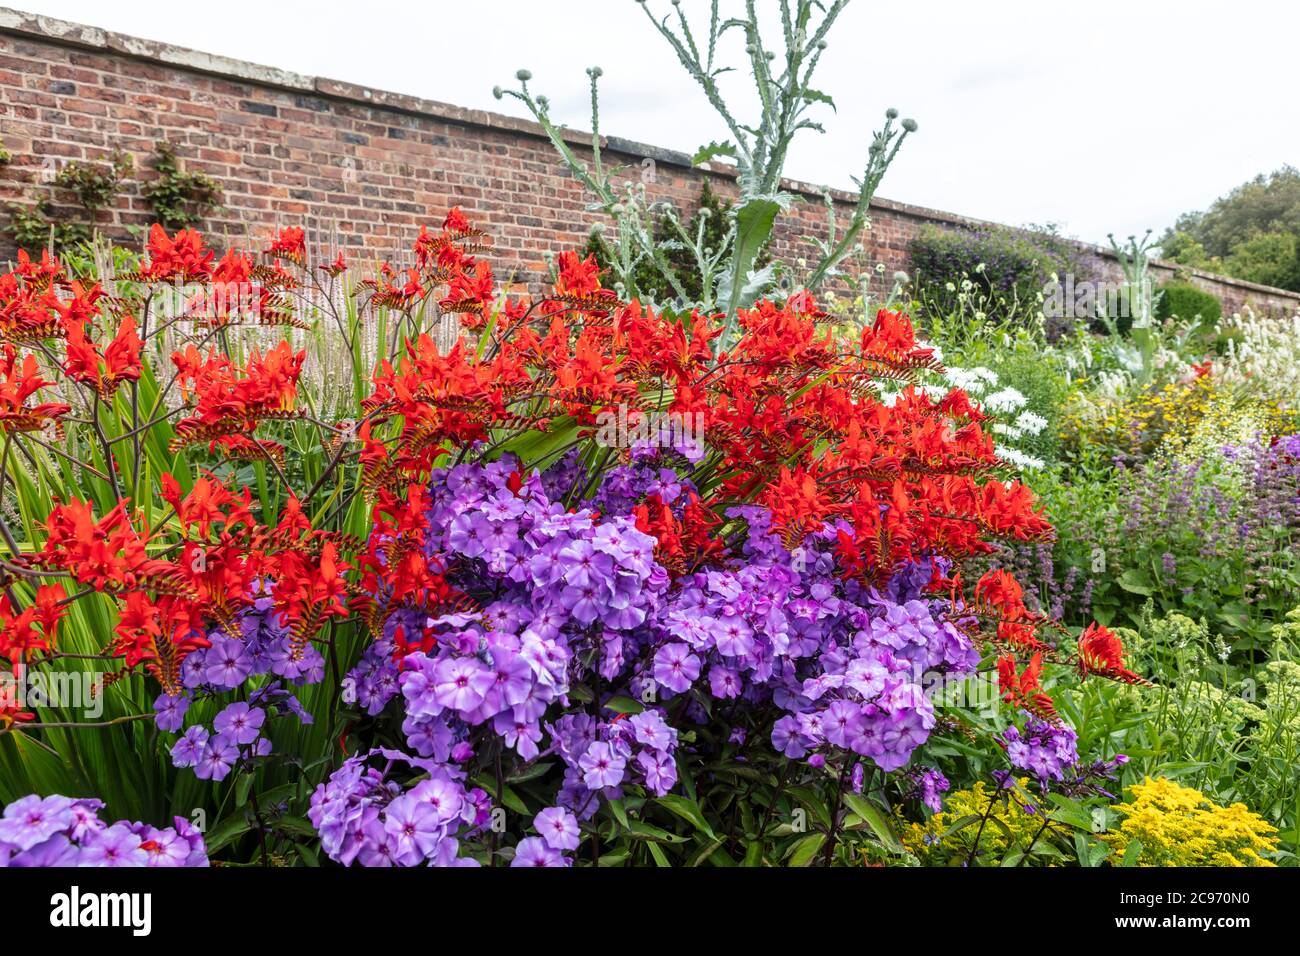 Red Crocosmia and purple phlox flowering plants in a herbaceous border. Stock Photo